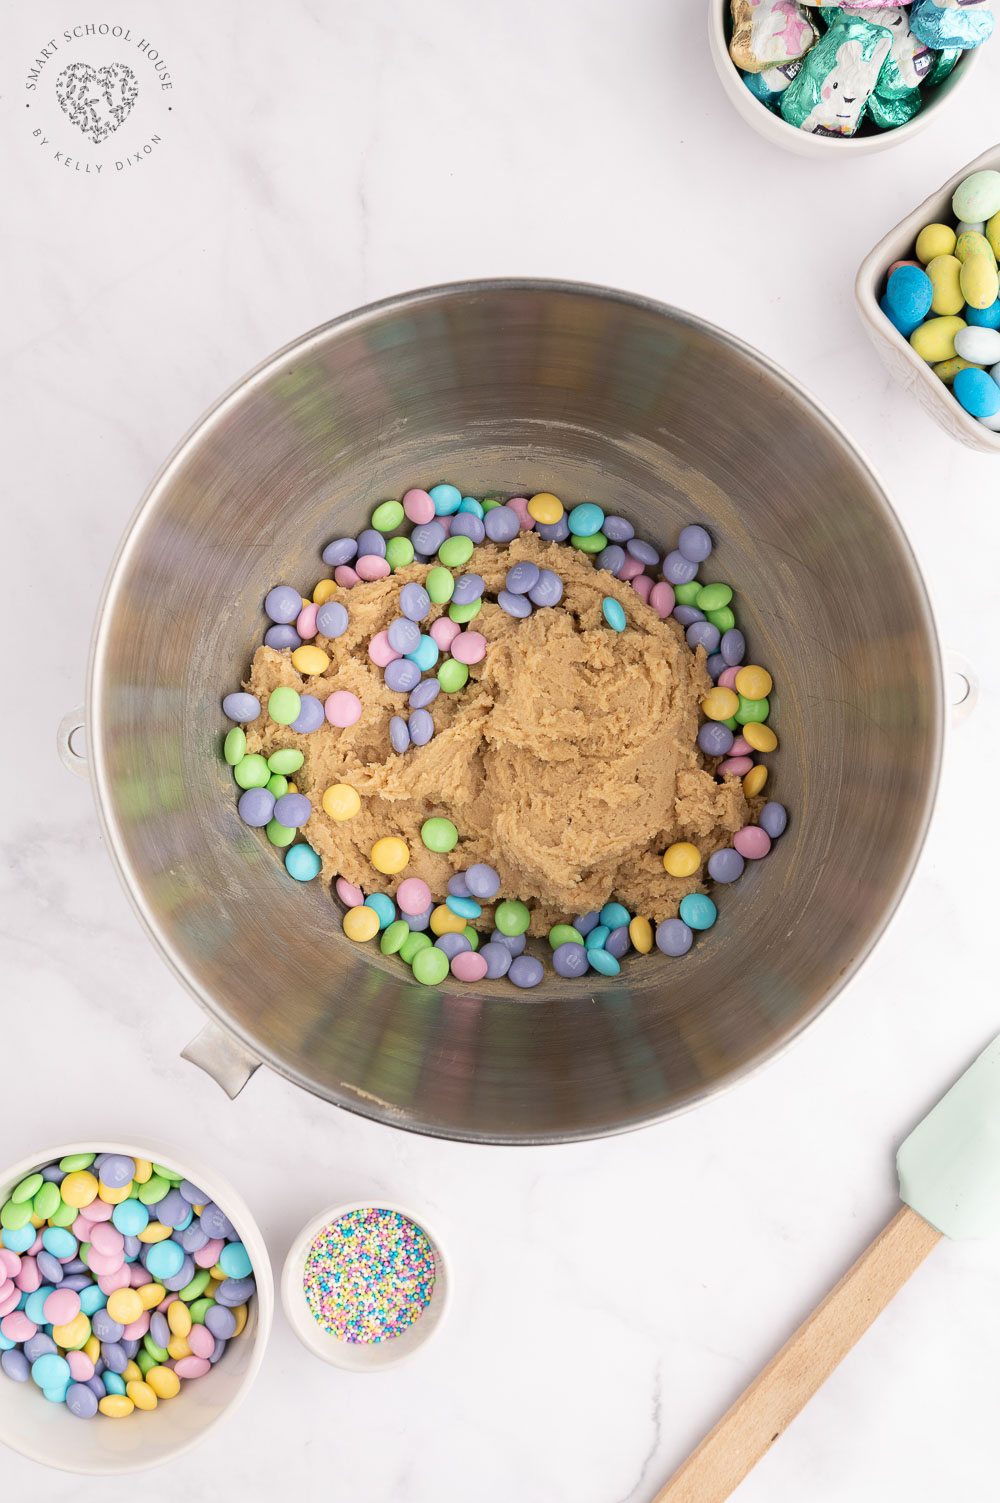 Add M&Ms to the cookie dough